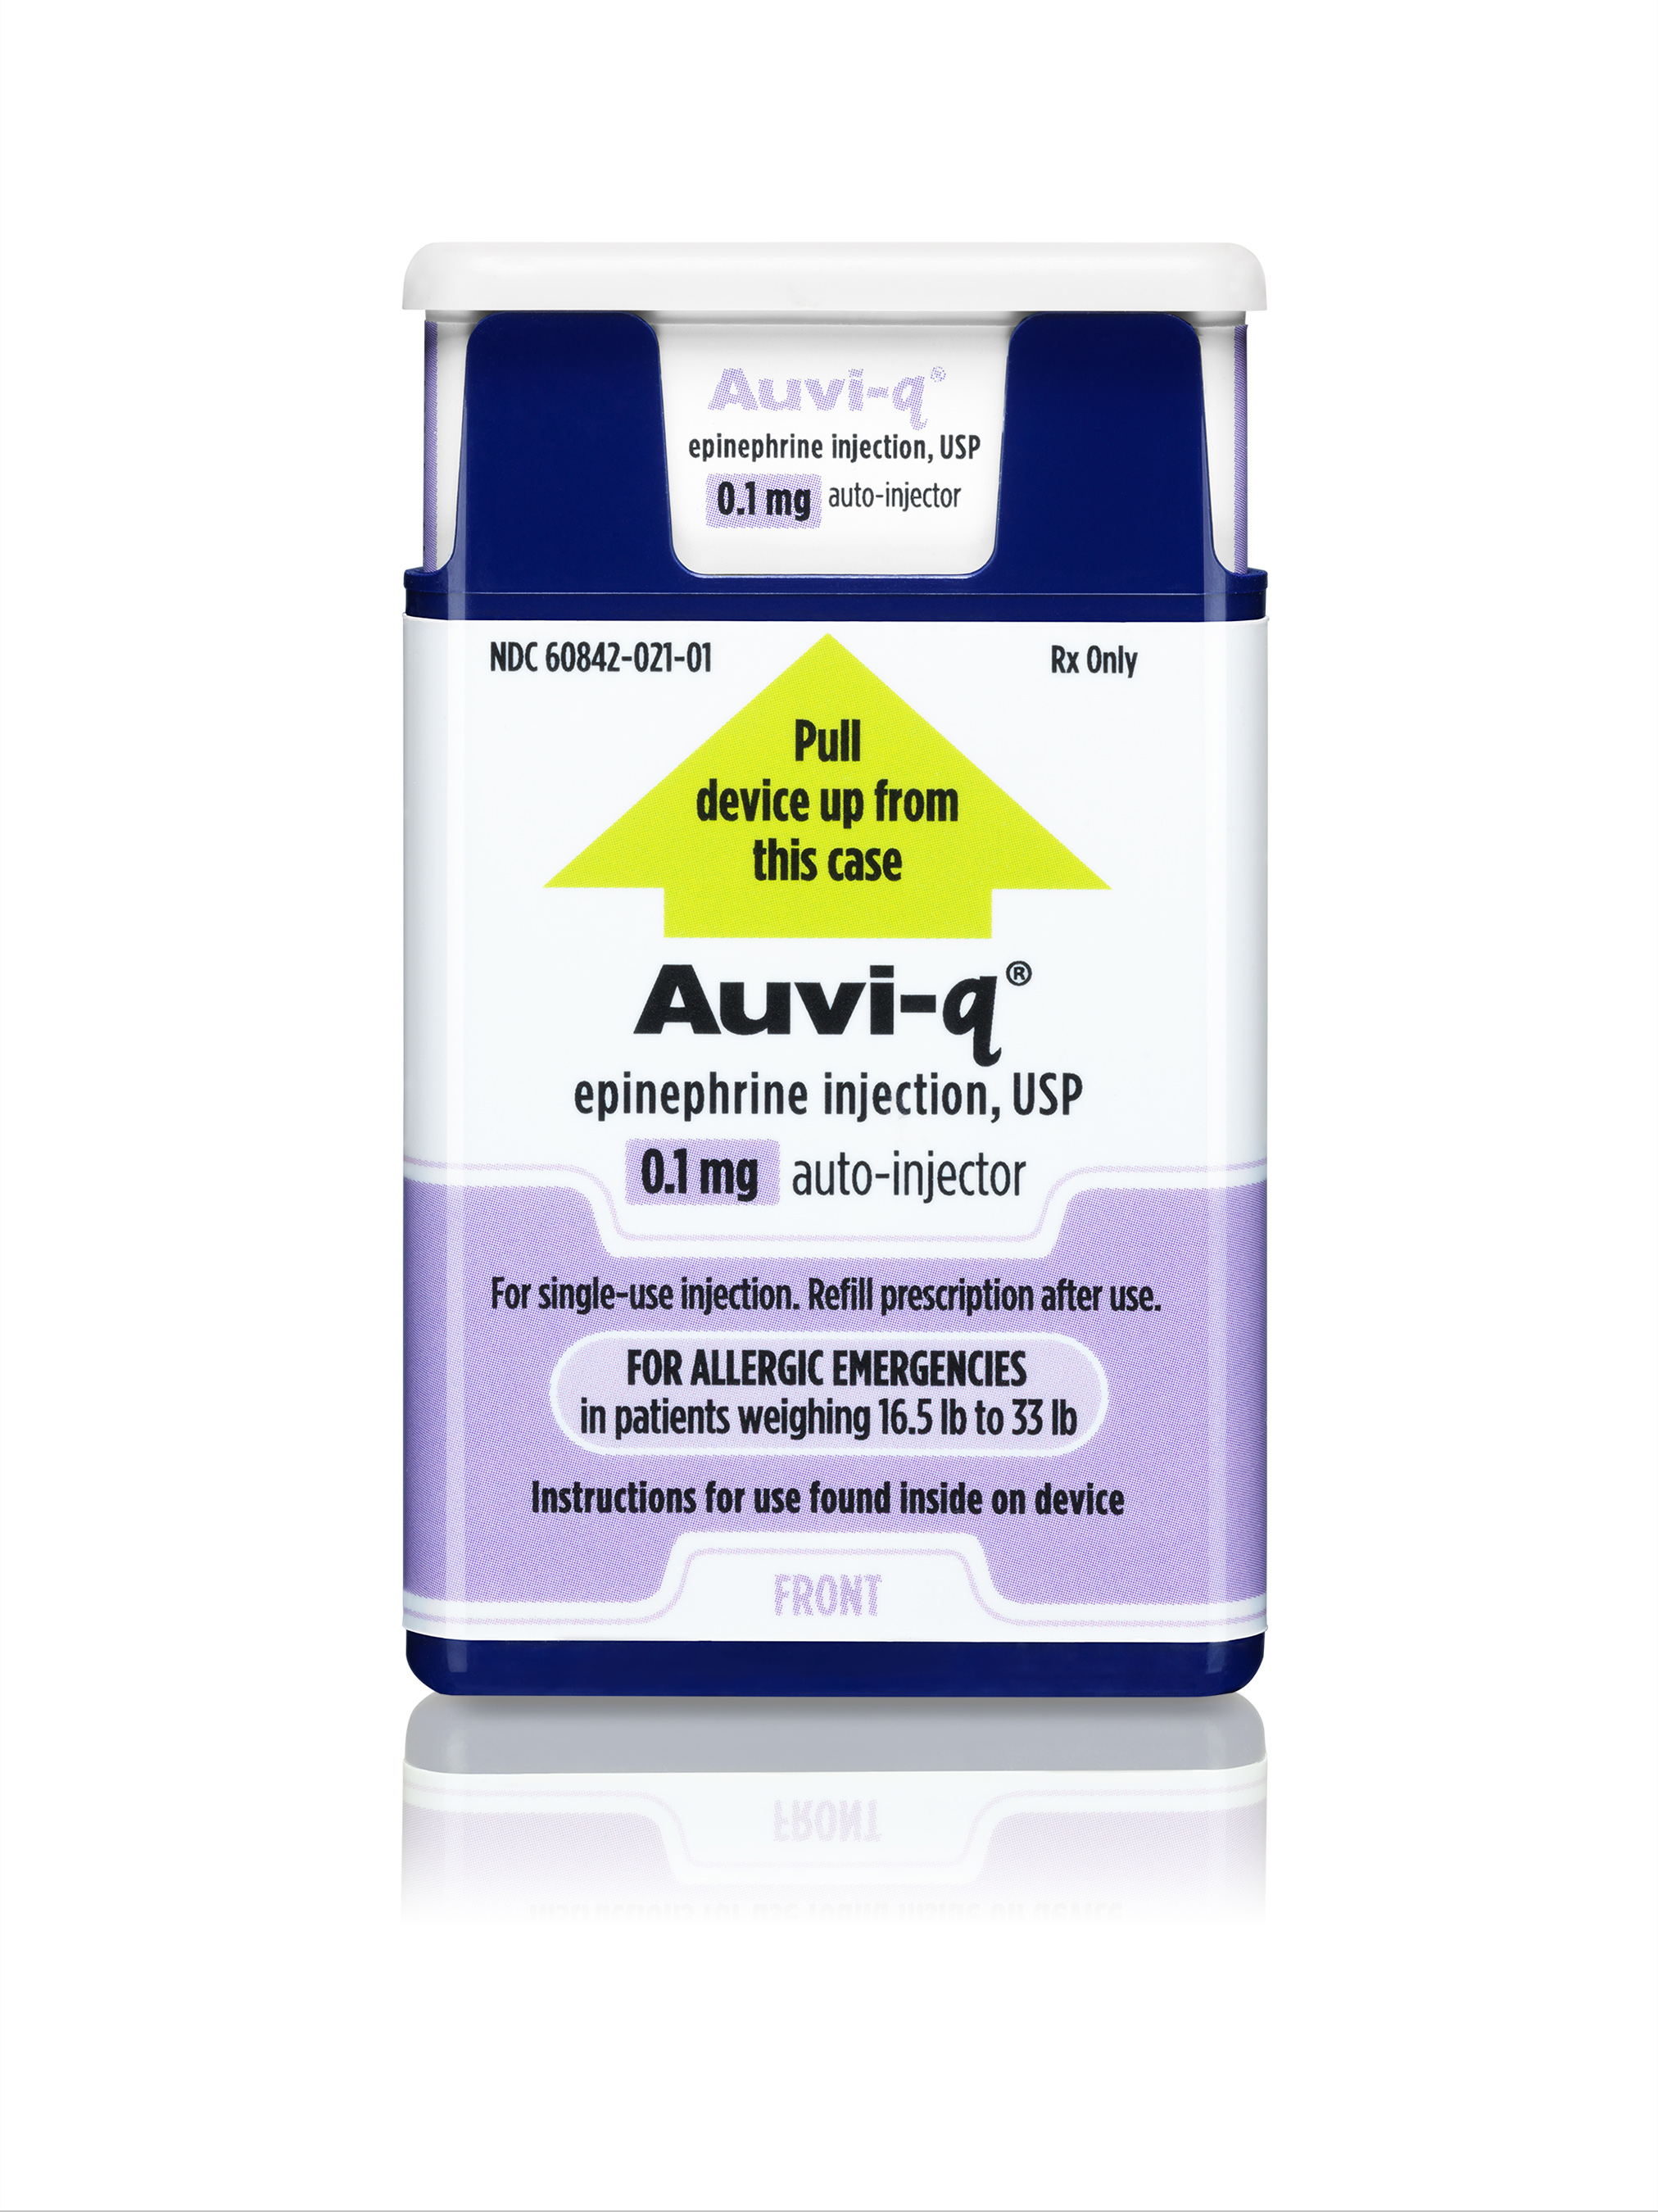 Only AUVI-q 0.1 mg has a dose and needle length designed specifically for treating anaphylaxis in infants and small children weighing 16.5 to 33 pounds.